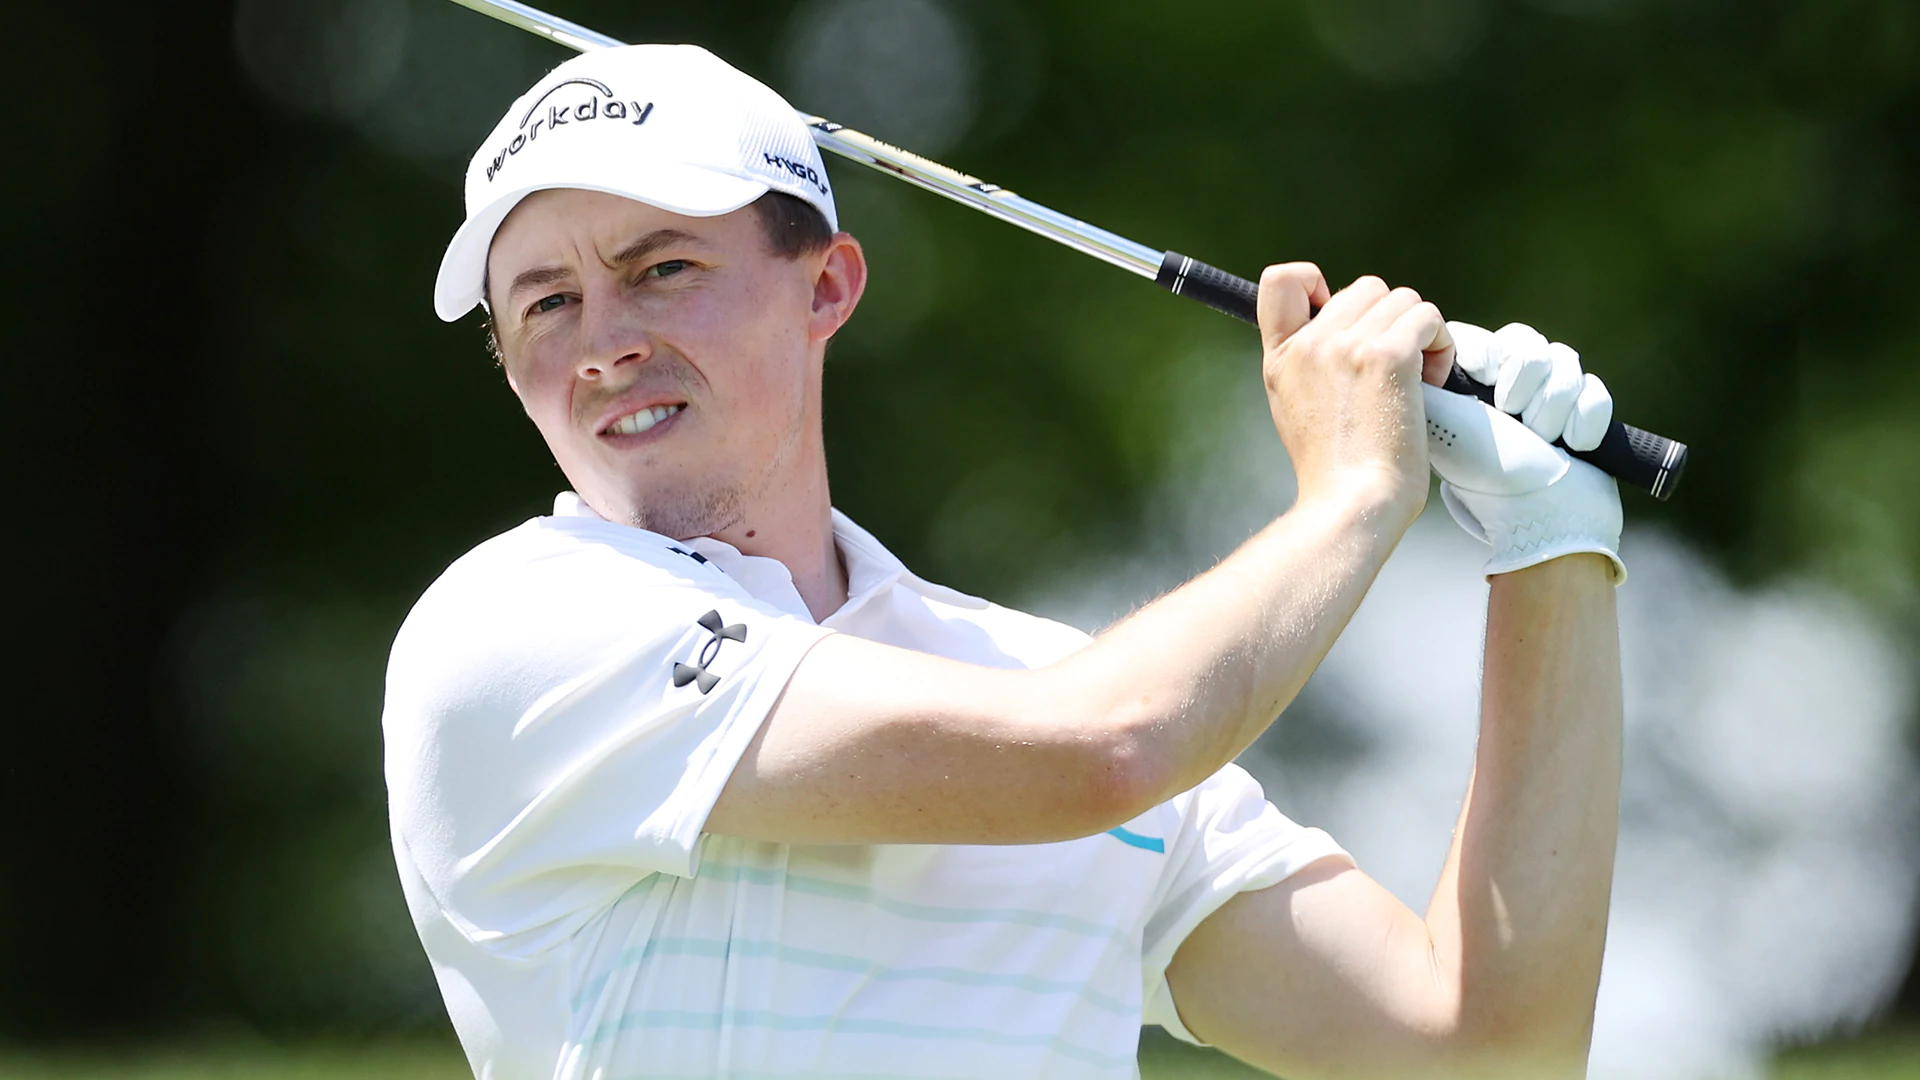 Matthew Fitzpatrick ‘shocked’ to have ‘Bones’ on the bag in Ohio